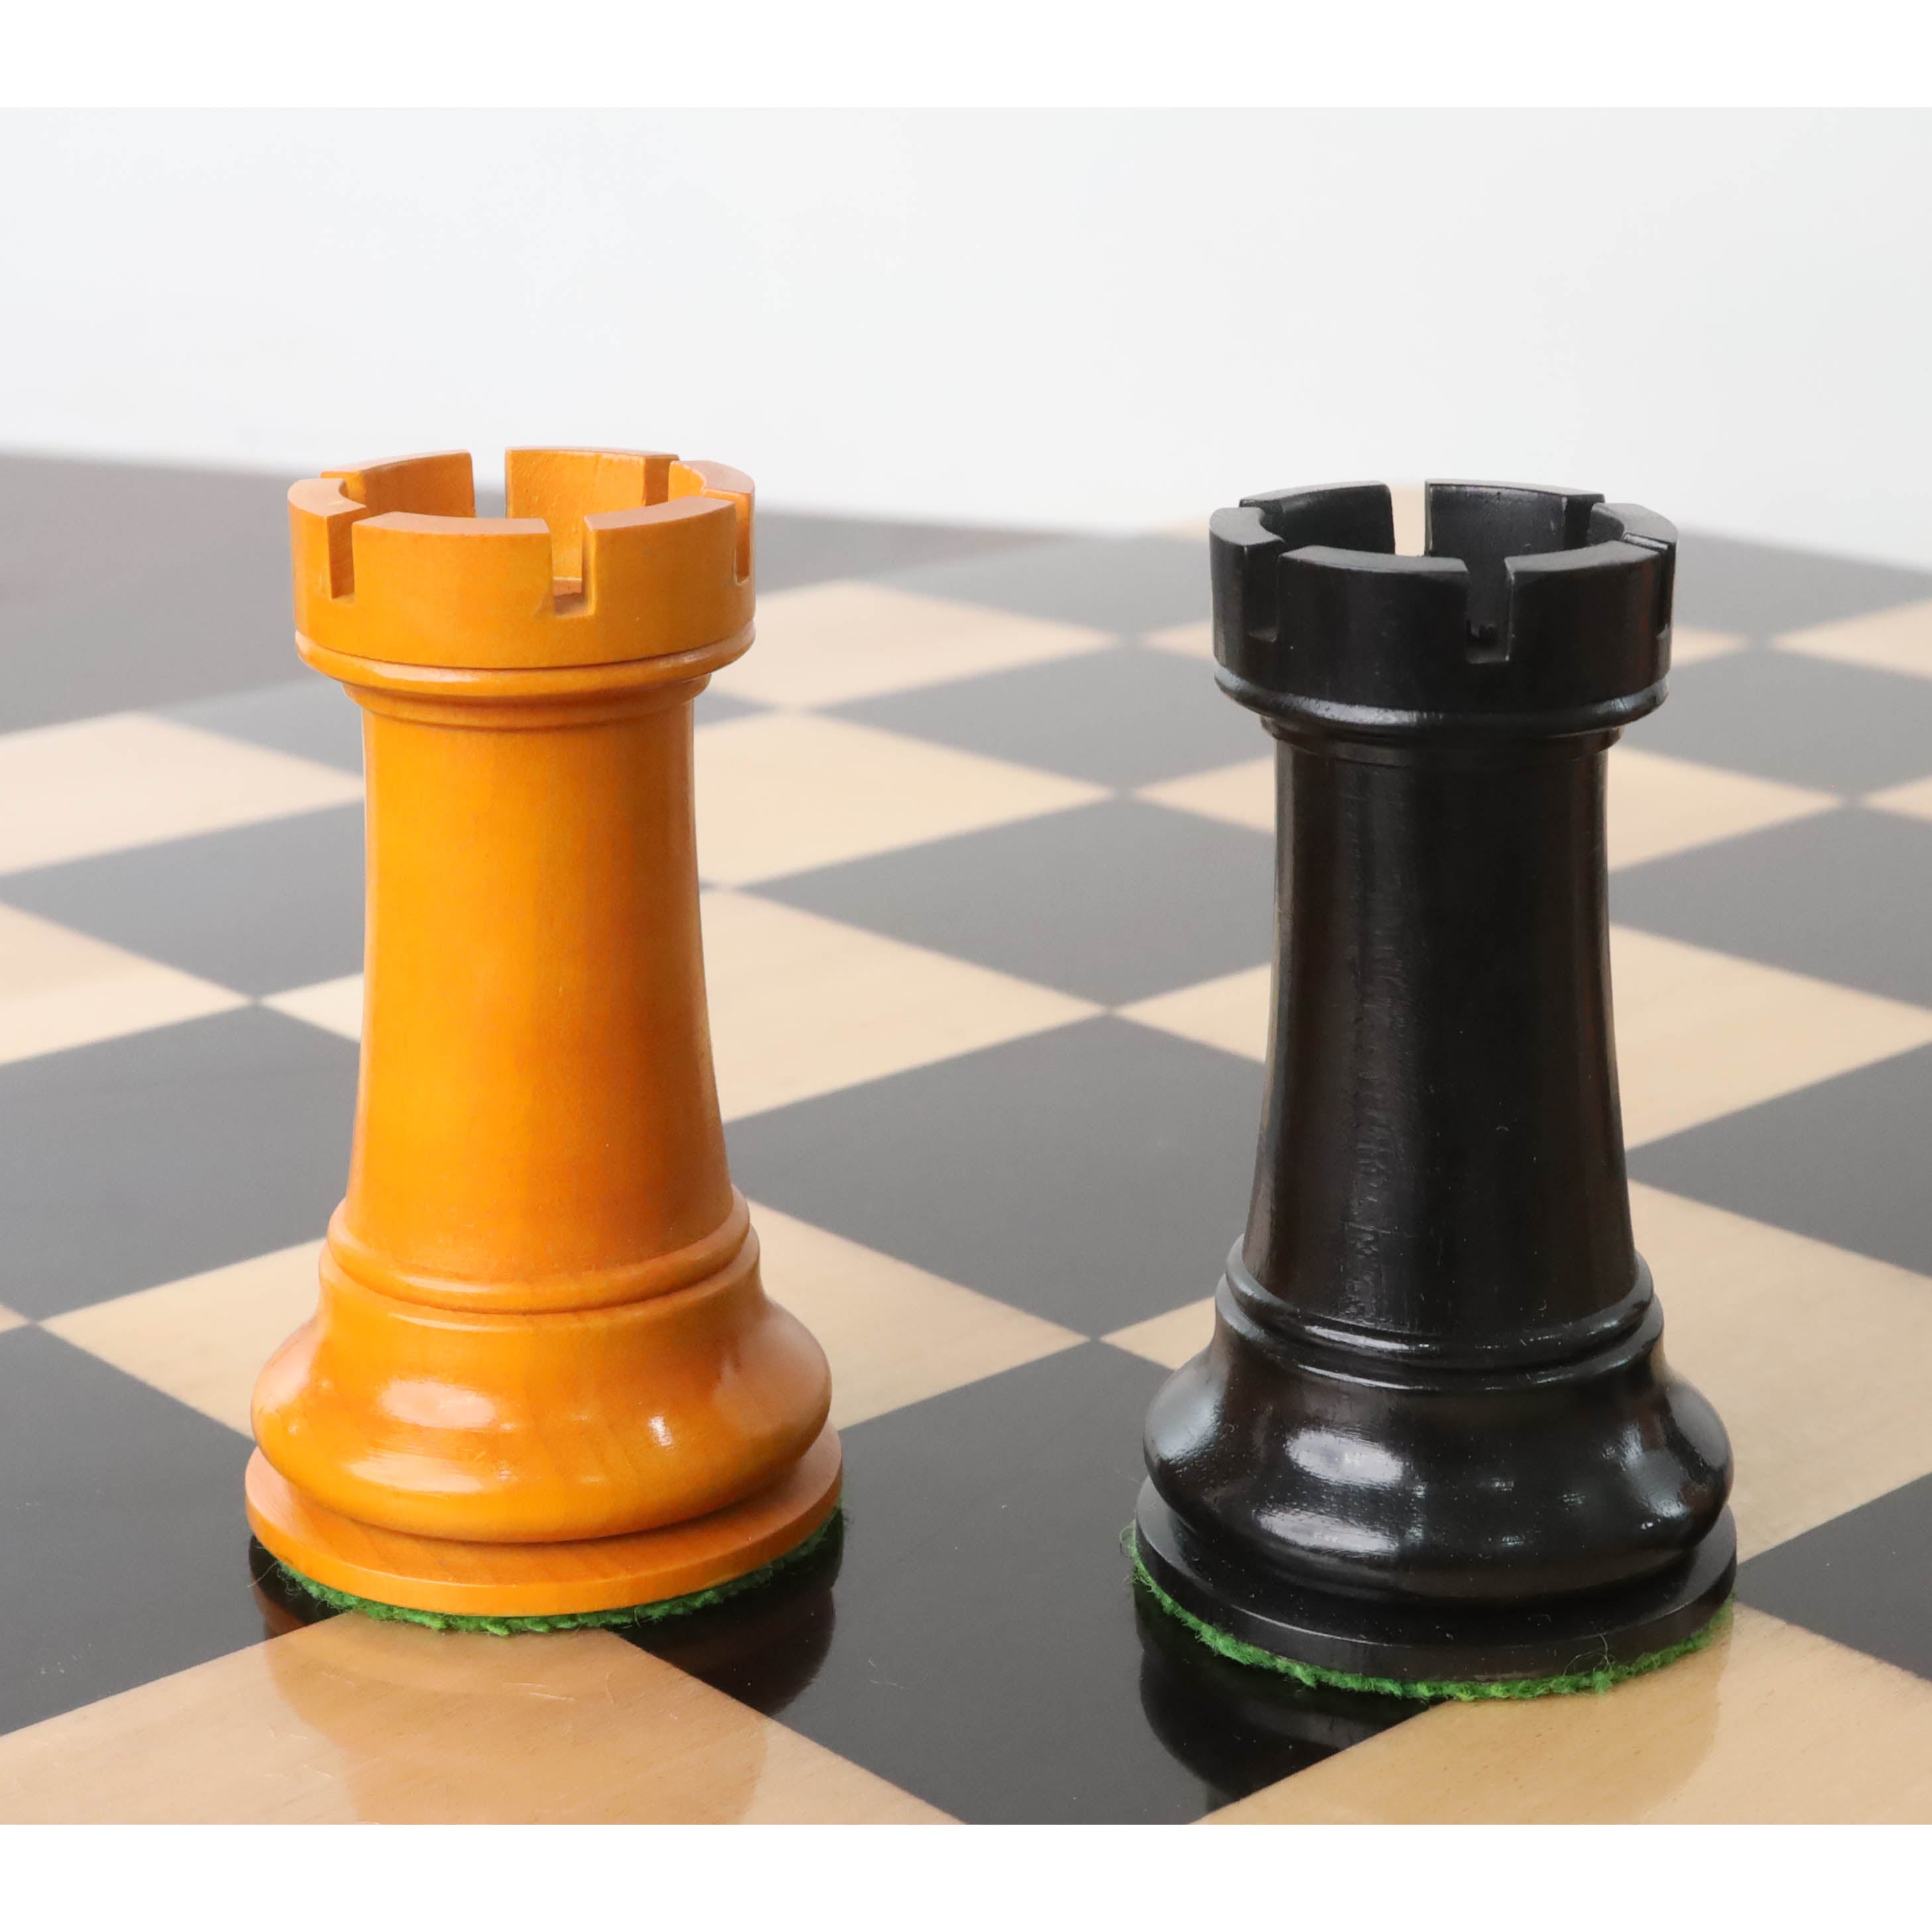 The Old English Elite Chess Set in Ebony and Mahogany [RCPB185] - $655.00 -  Regency Chess - Finest Quality Chess Sets, Boards & Pieces